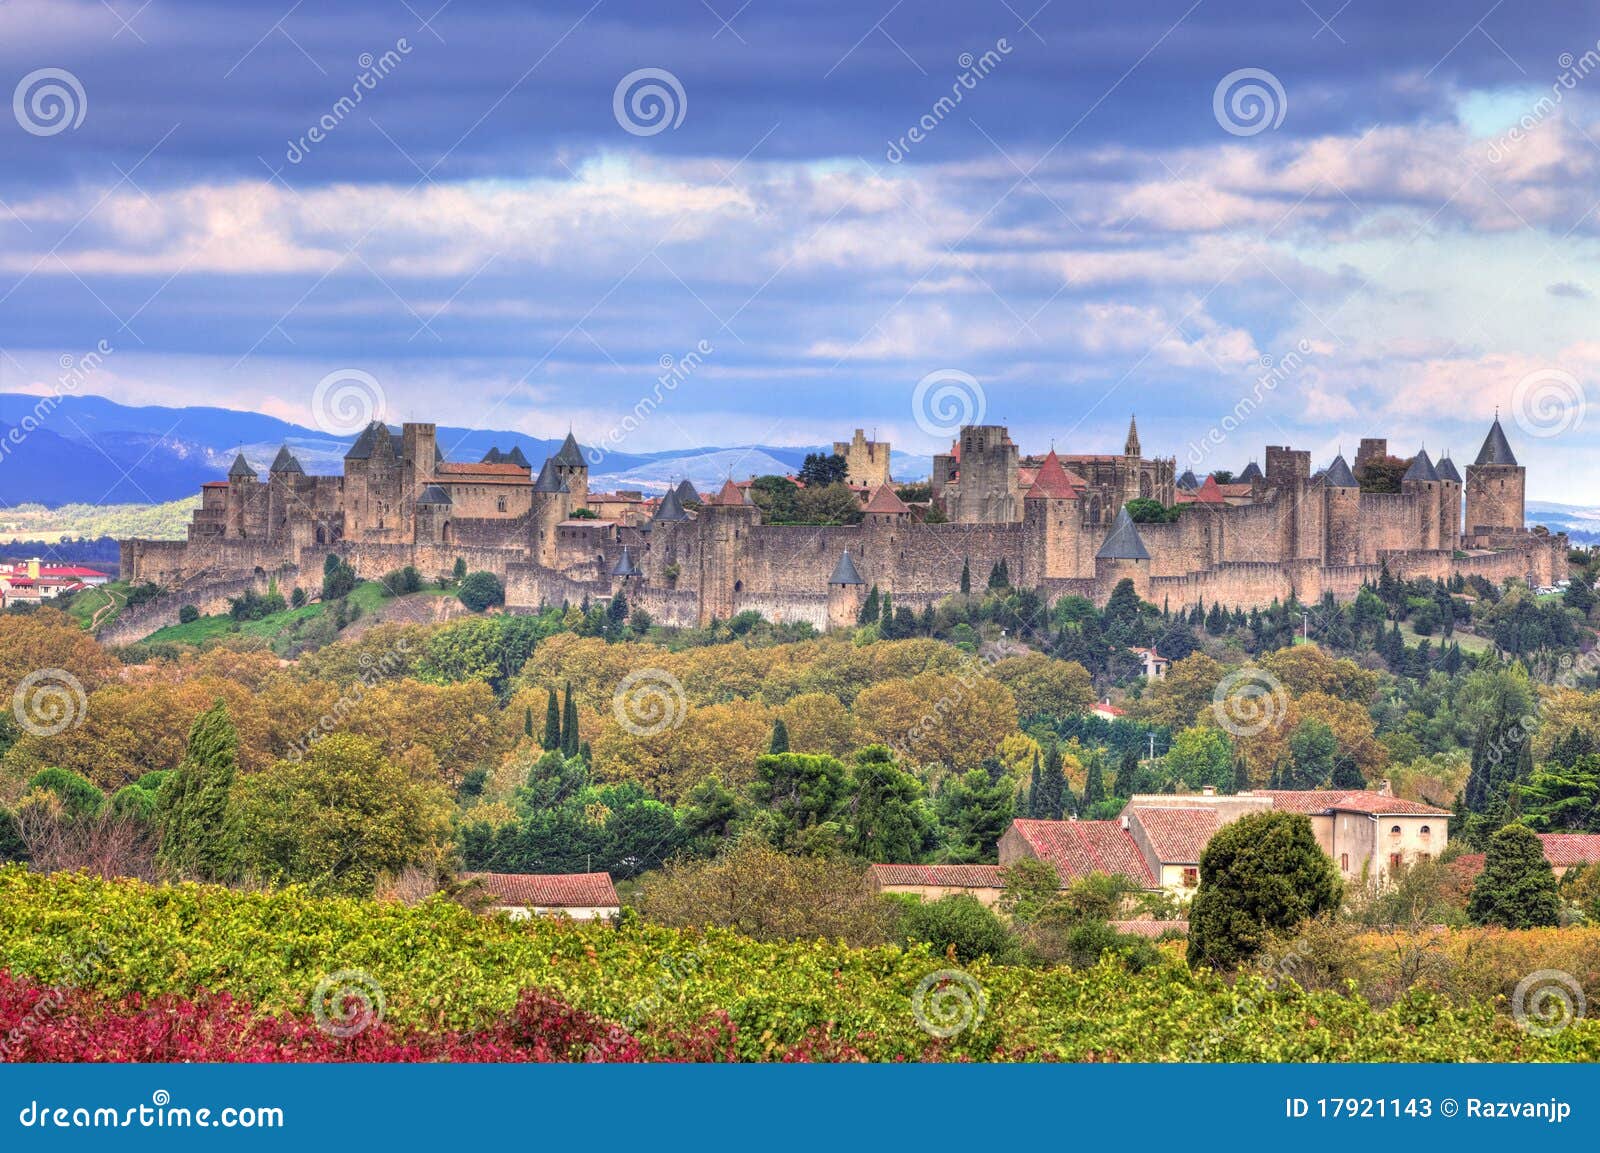 carcassonne-fortified town